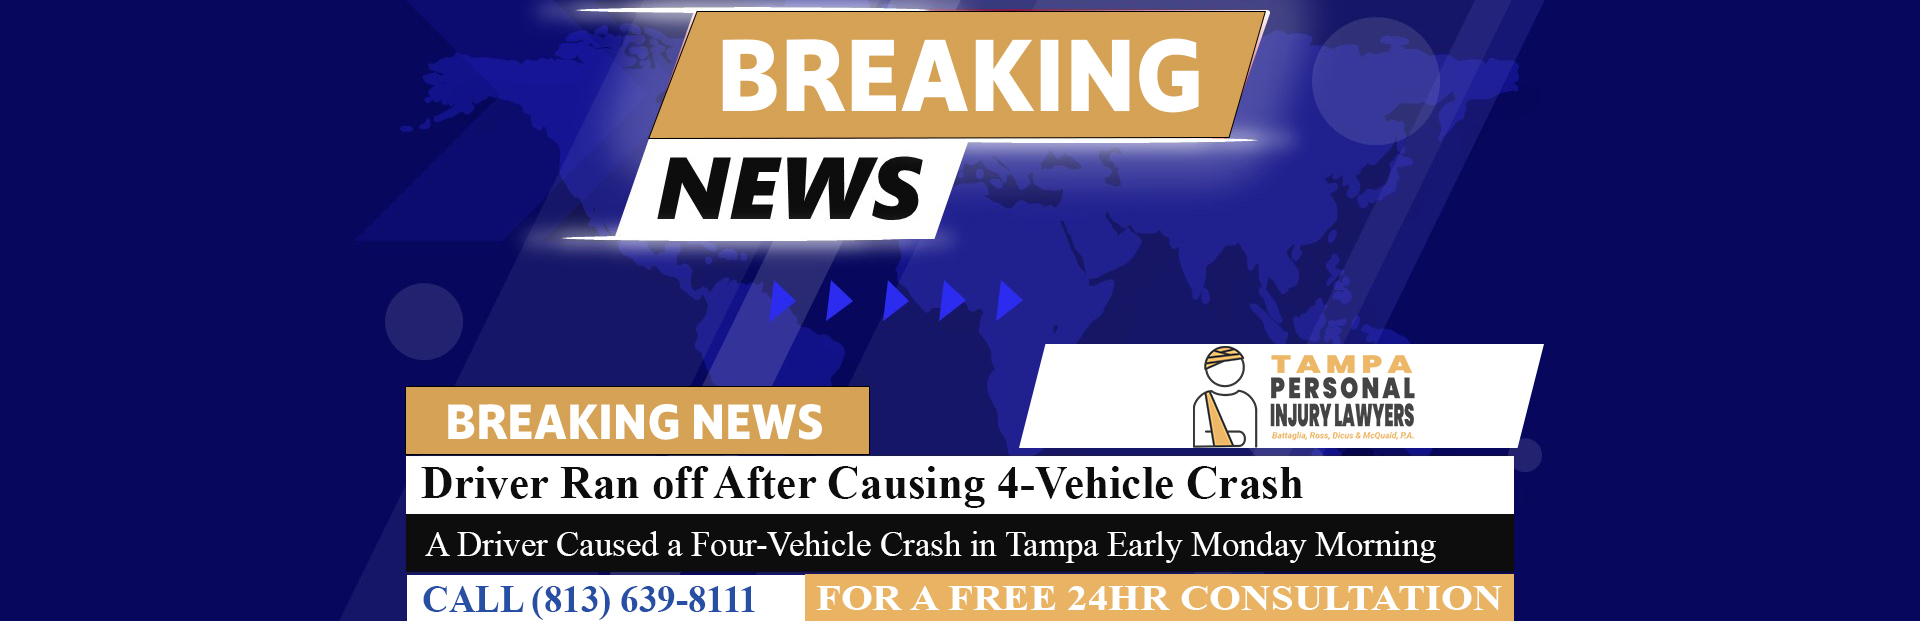 [03-06-24] Driver Ran off After Causing 4-Vehicle Crash on North Dale Mabry in Tampa